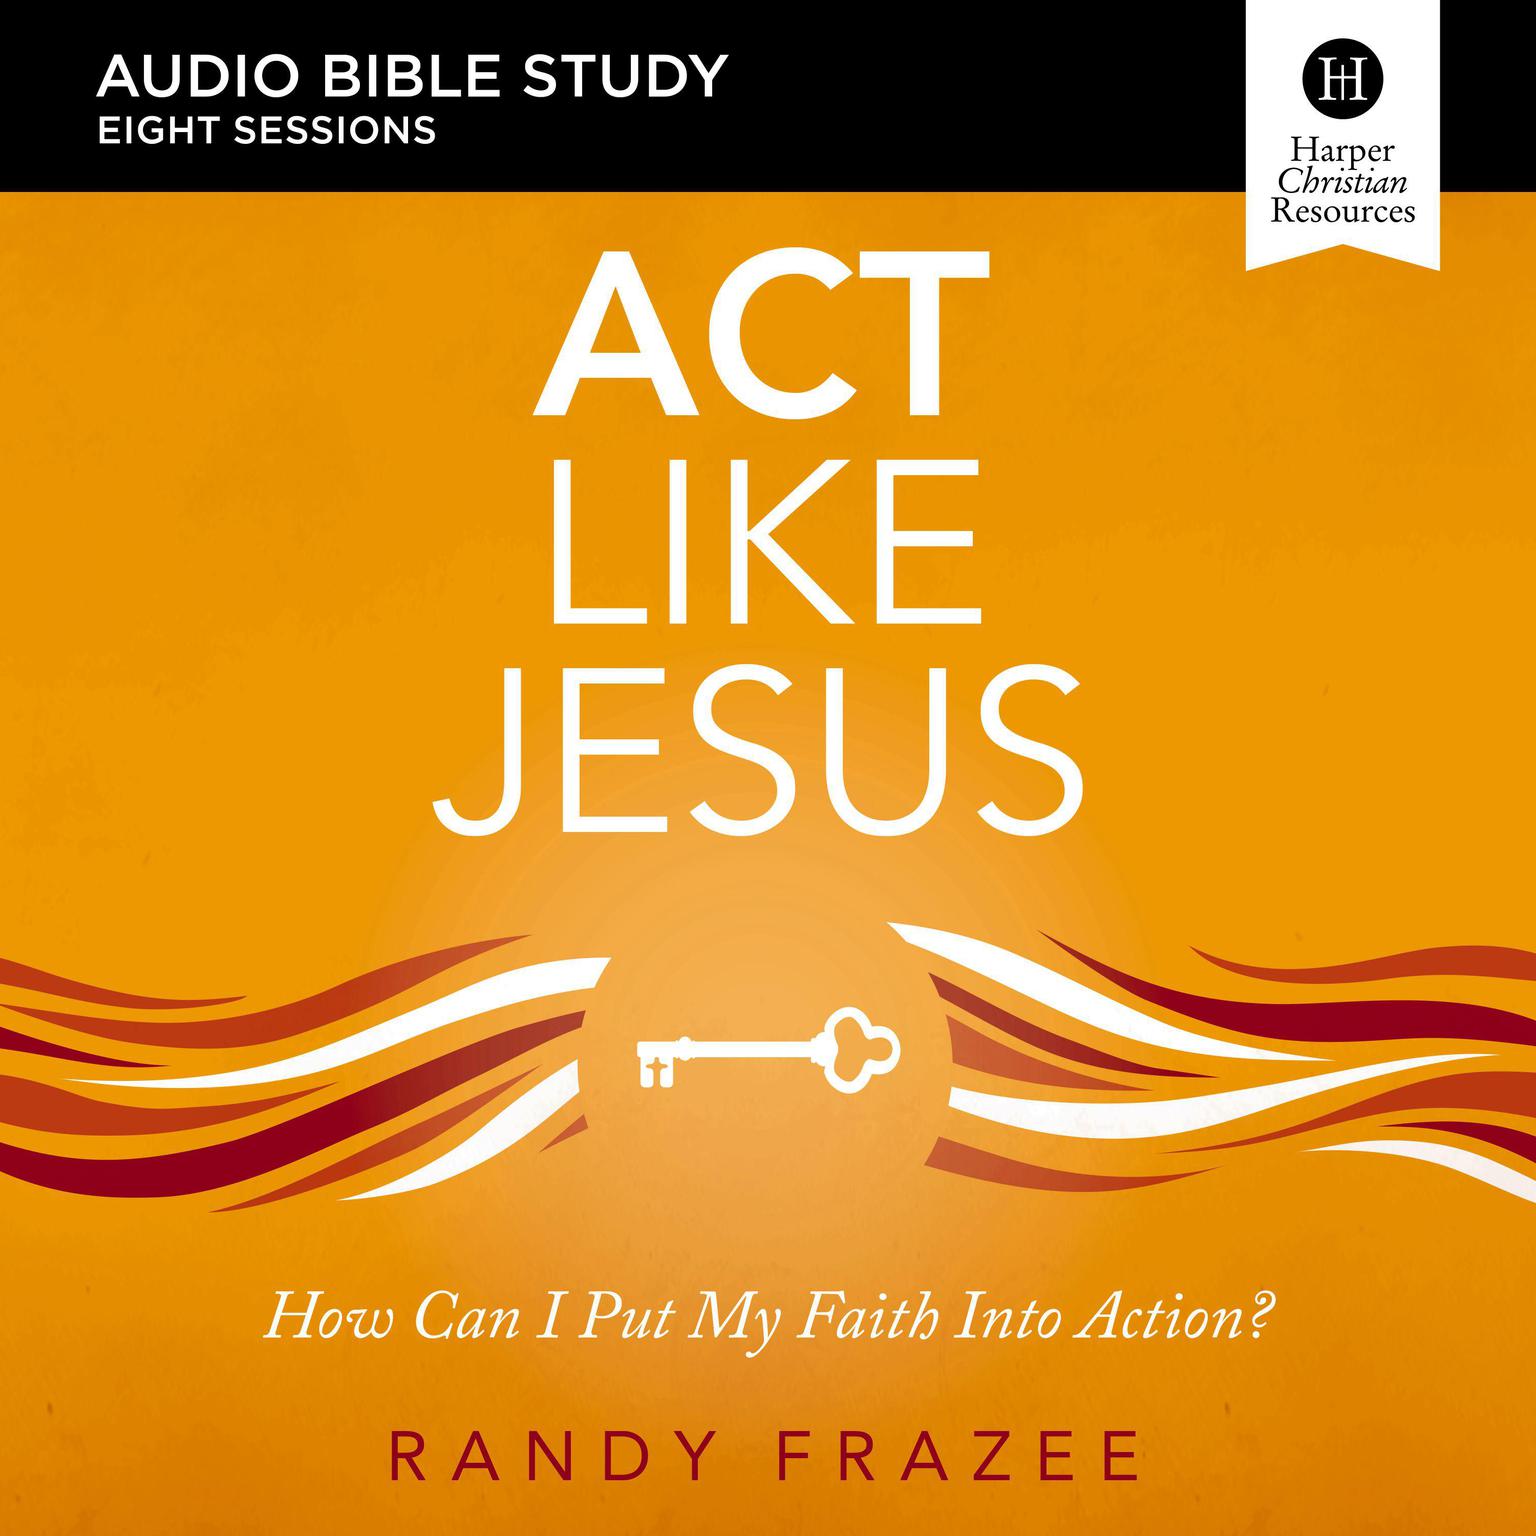 Act Like Jesus: Audio Bible Studies: How Can I Put My Faith into Action? Audiobook, by Randy Frazee